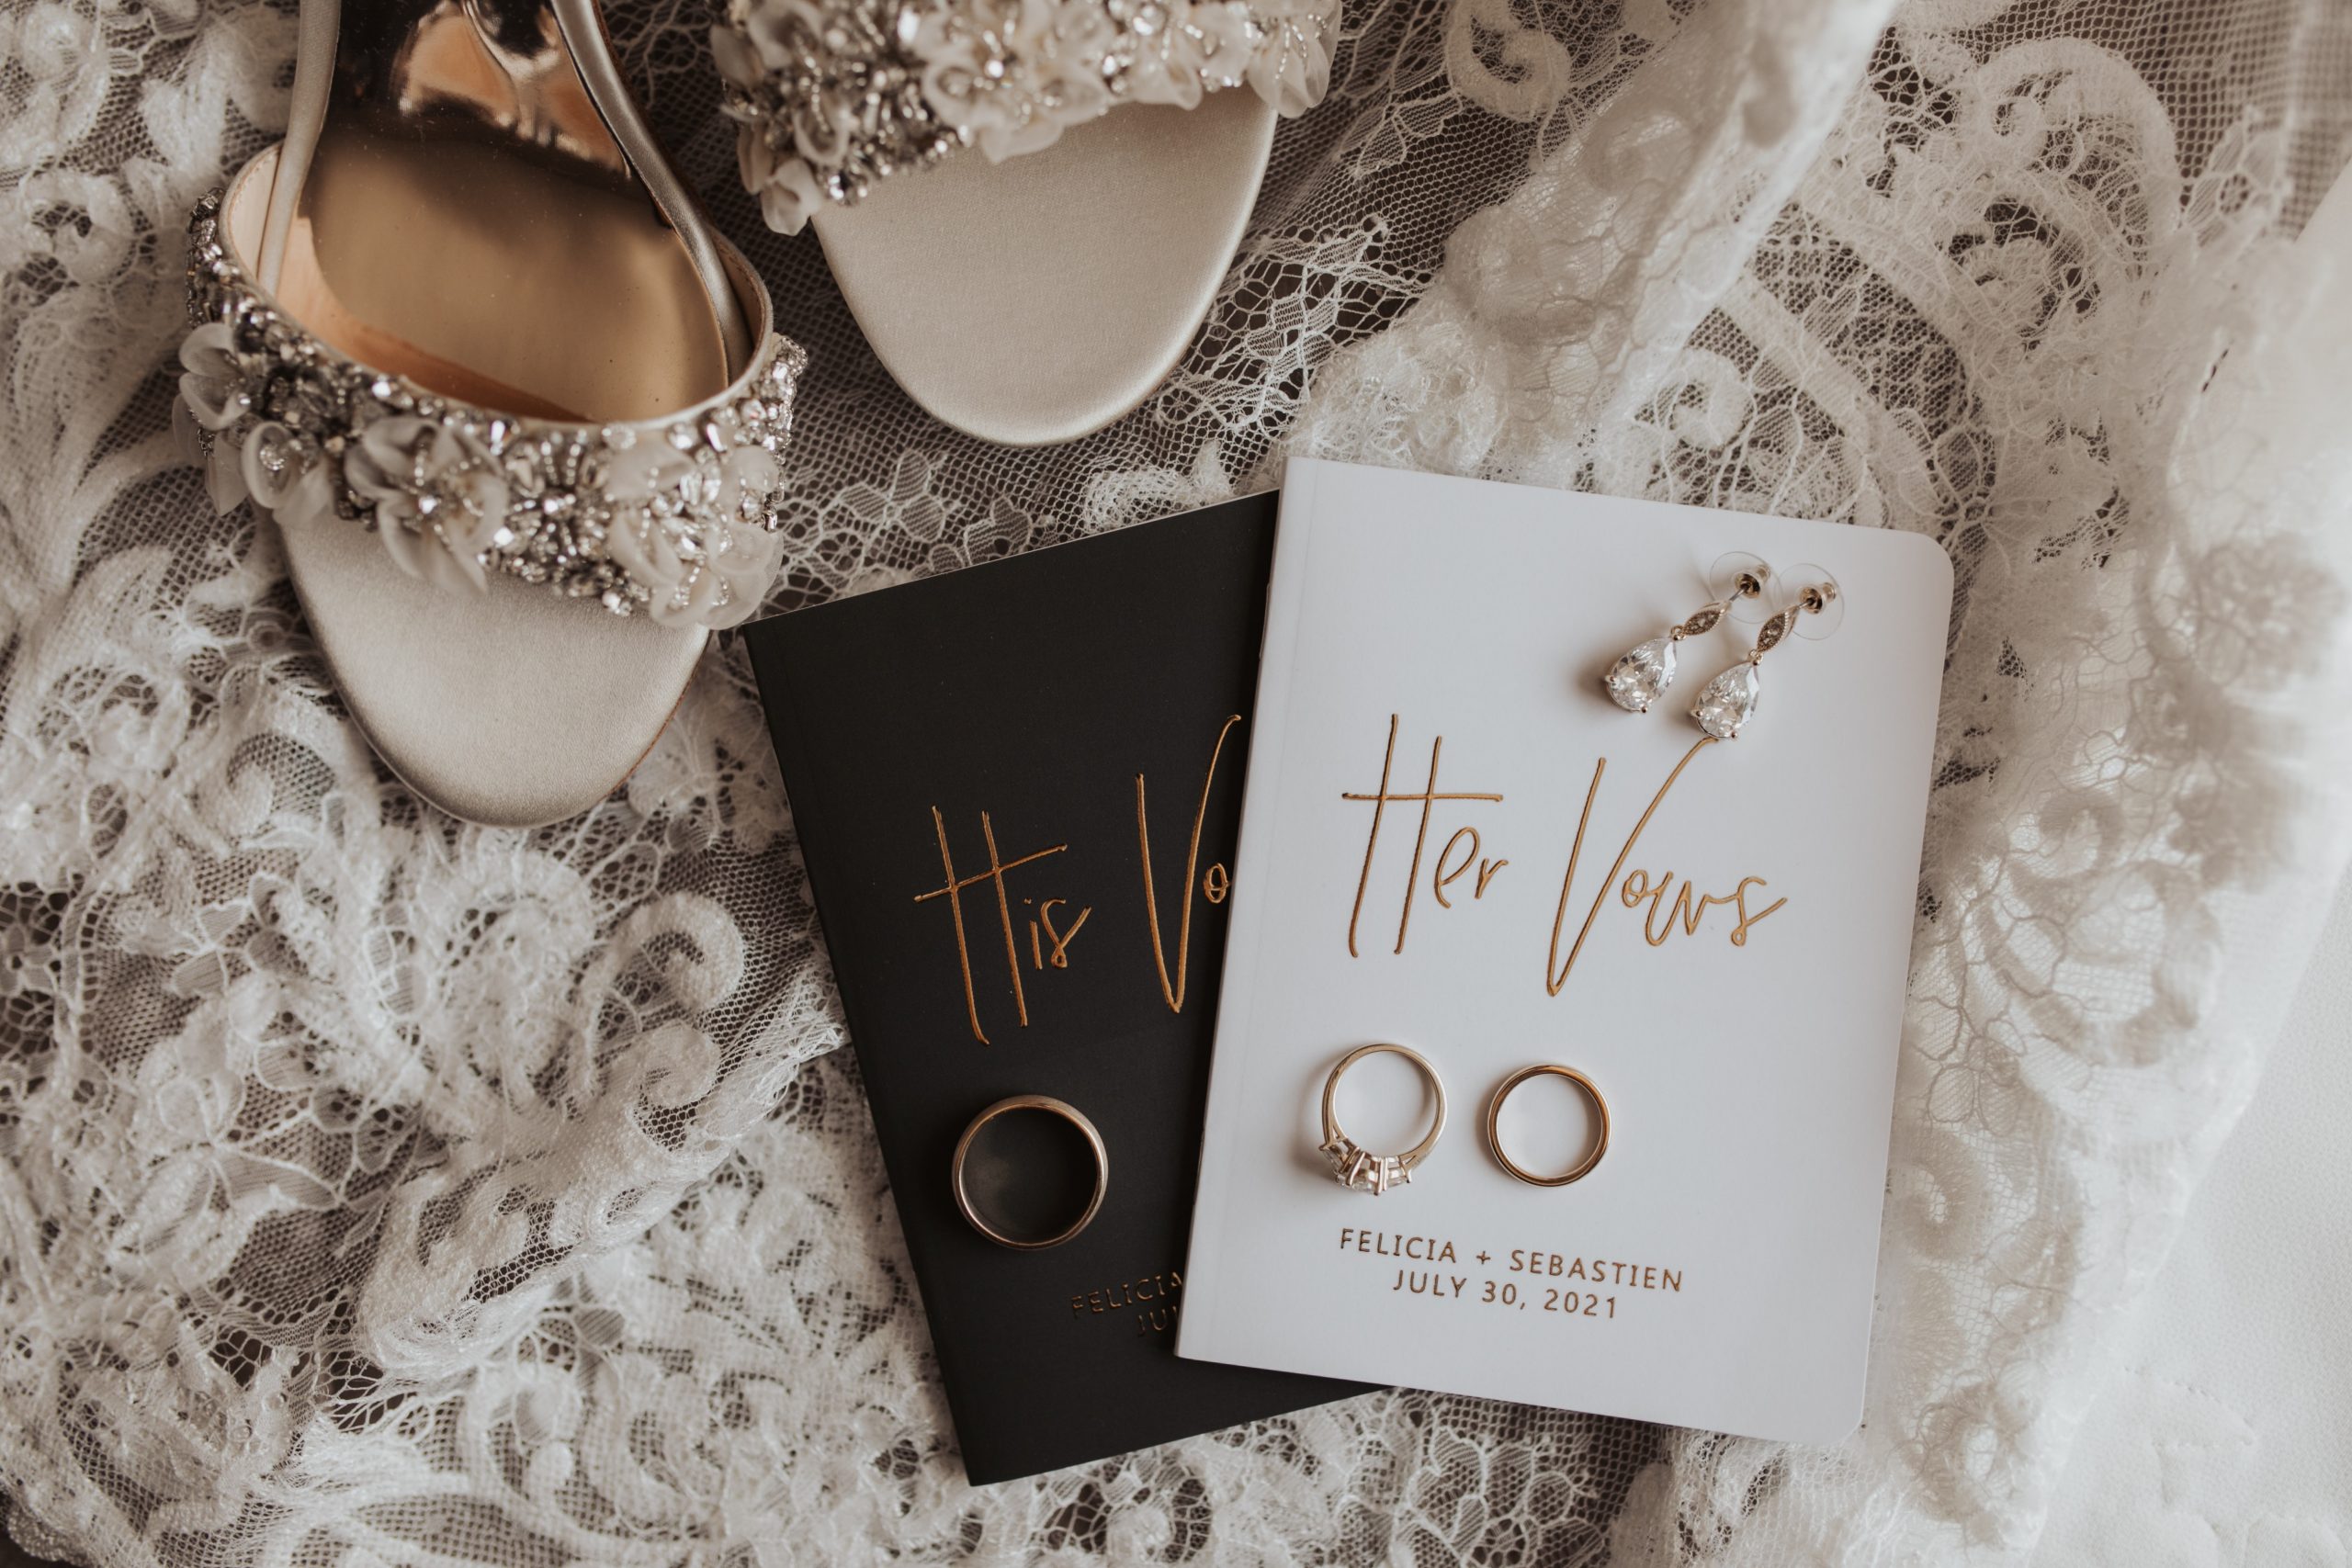 wedding vow booklets and bridal shoes